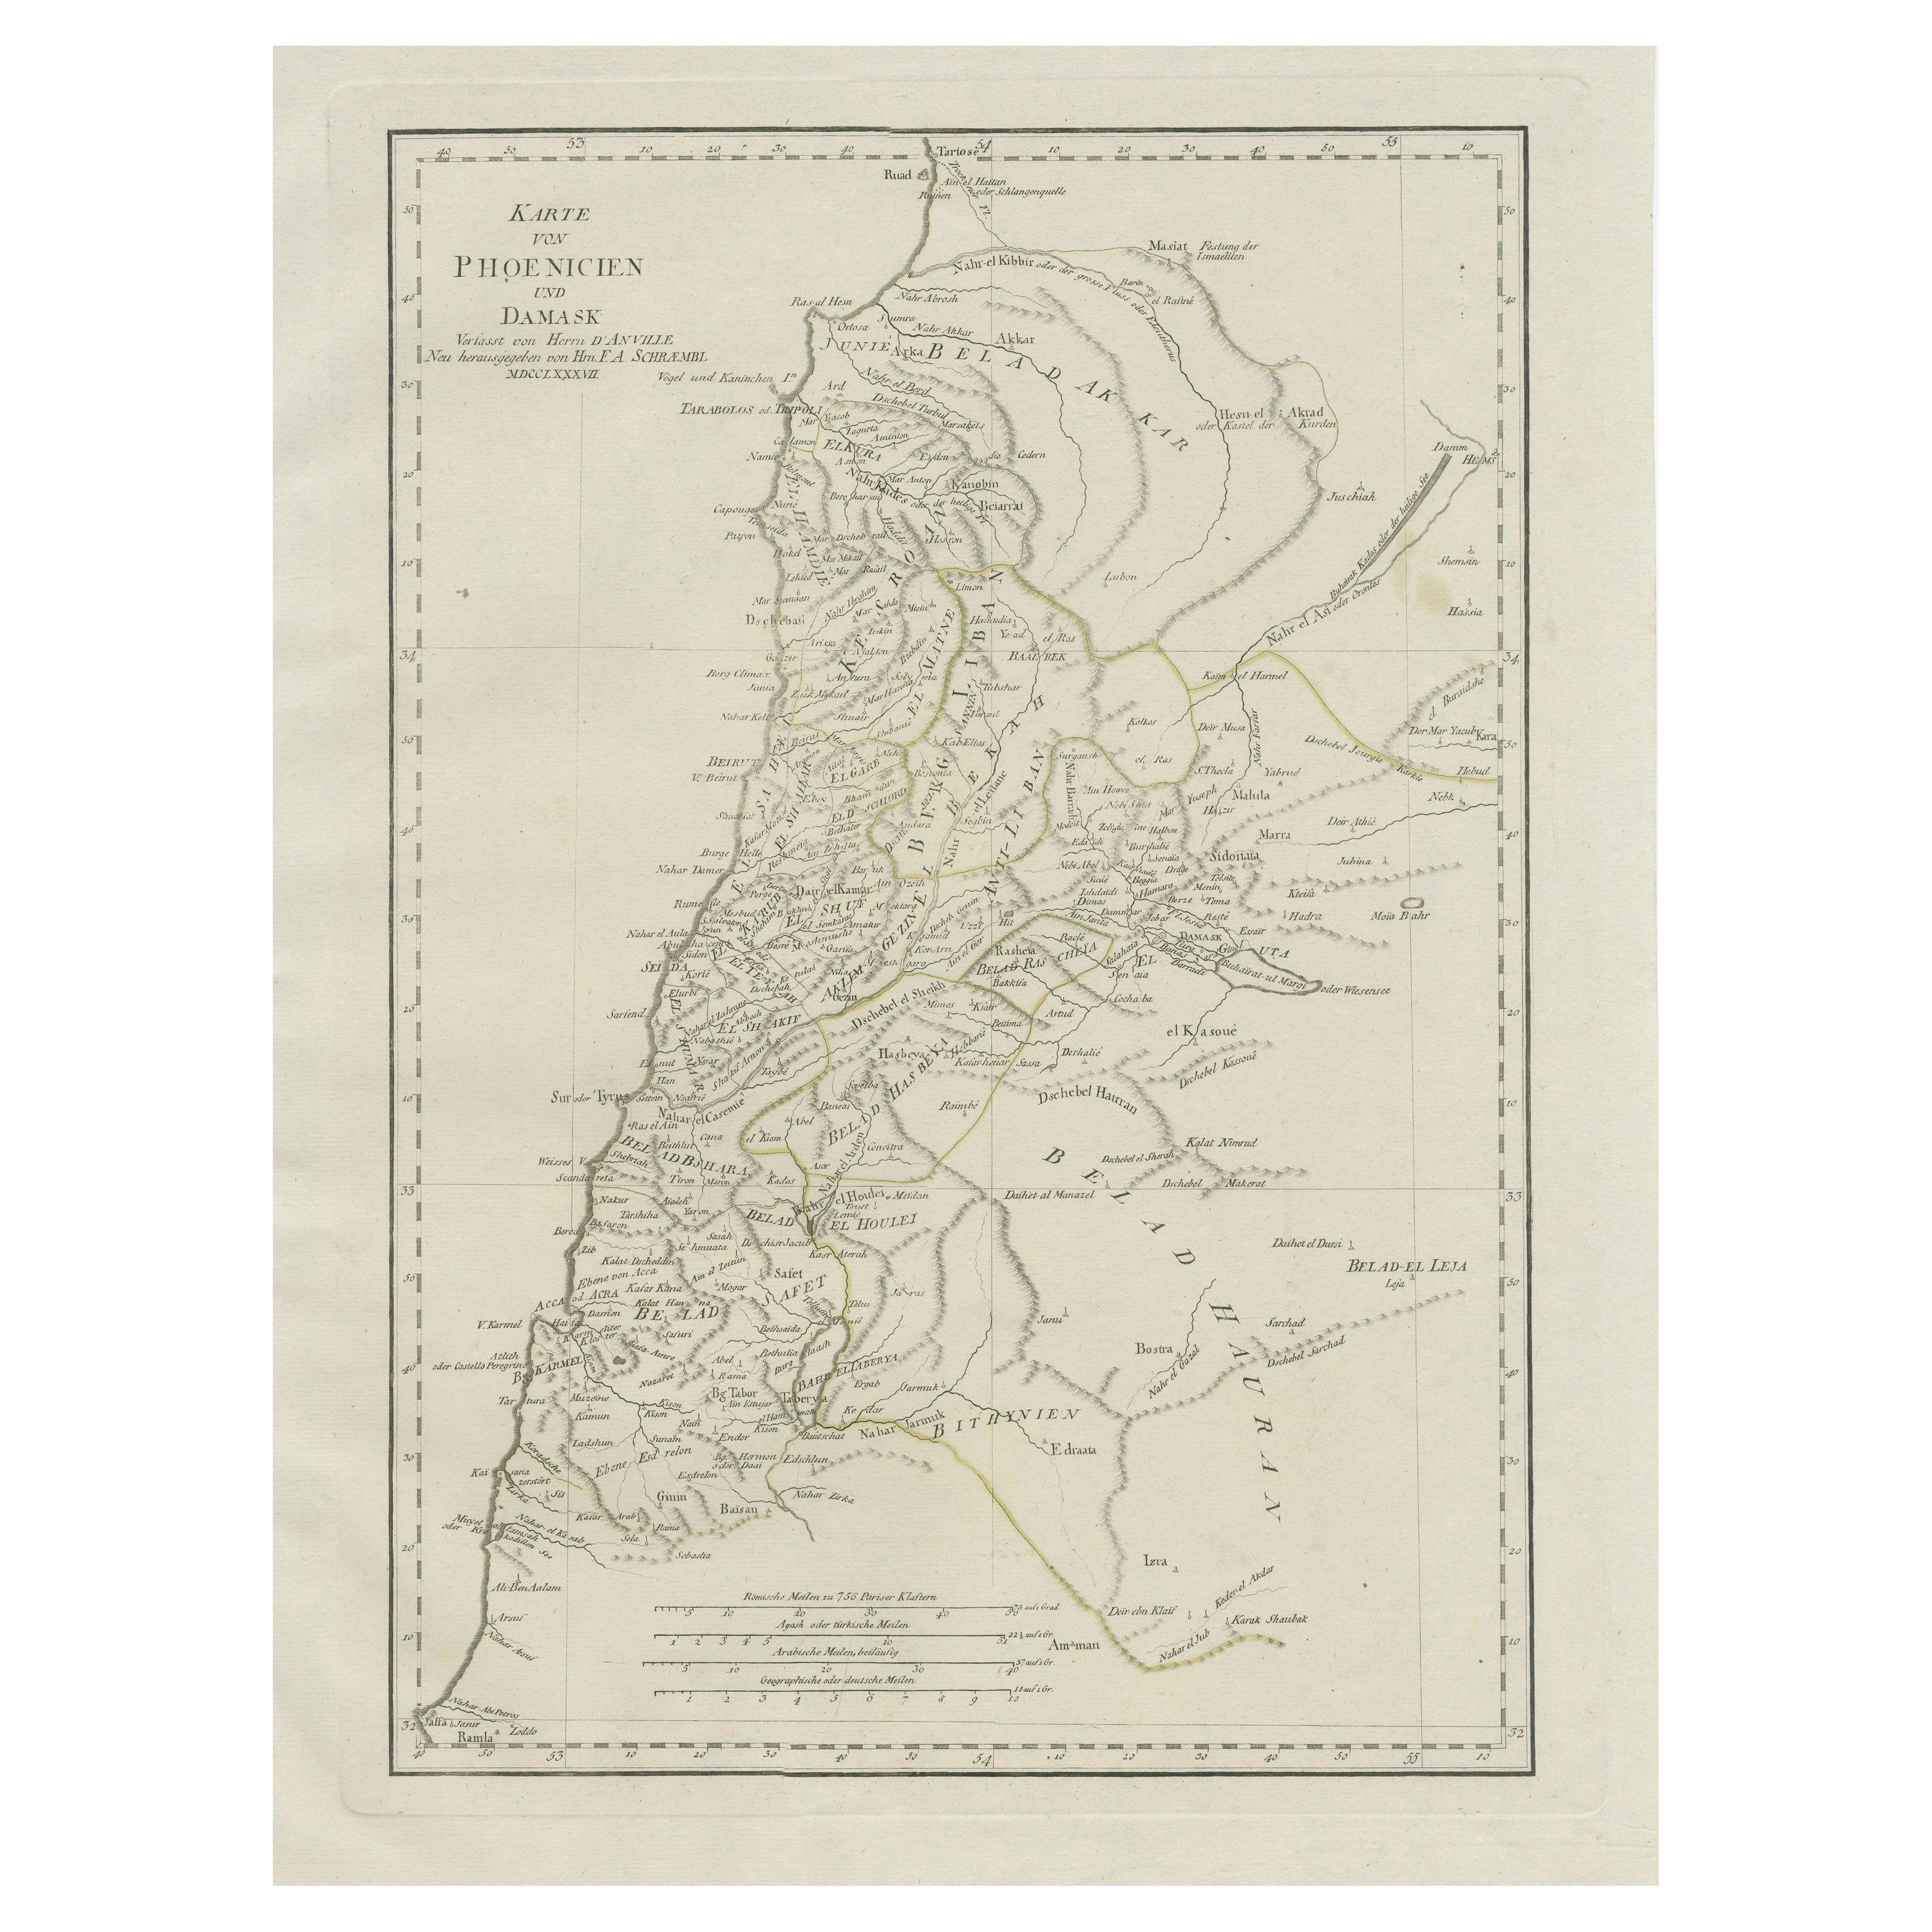 Antique Map of Contemporary Phoenicia and Damascus, with Northern Palestine